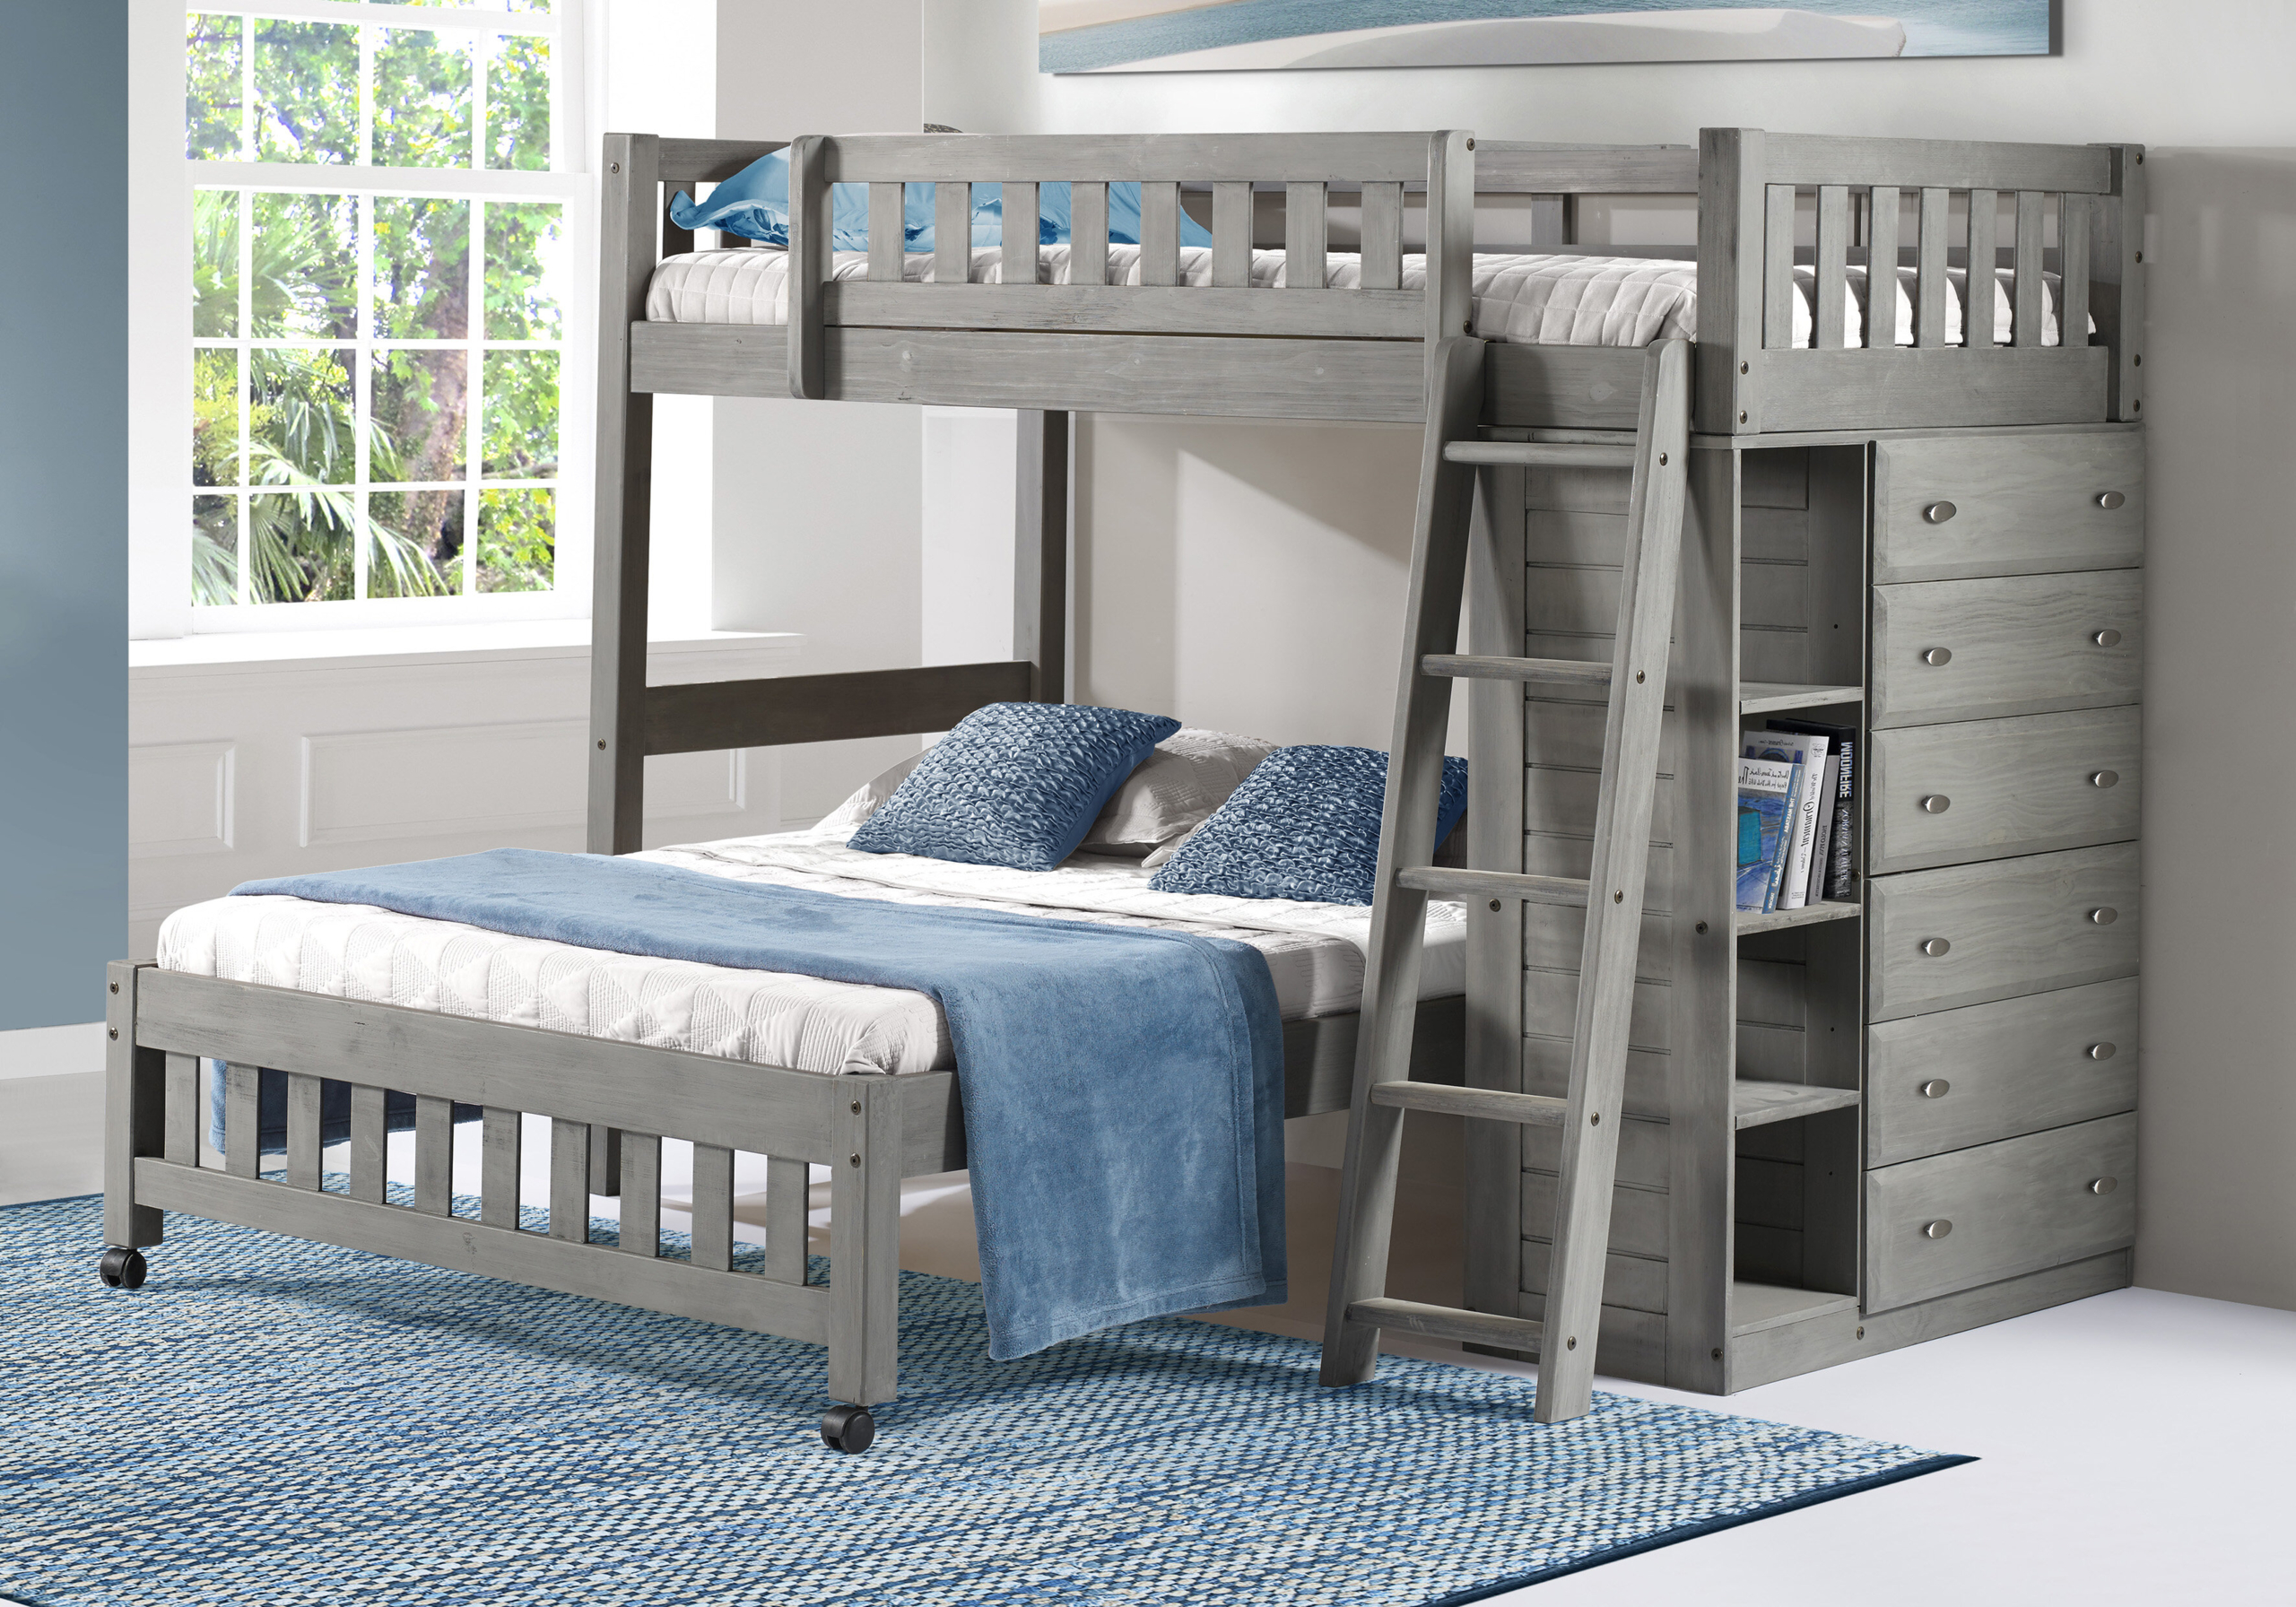 Bunk Beds With Dressers Visualhunt, A Bunk Bed